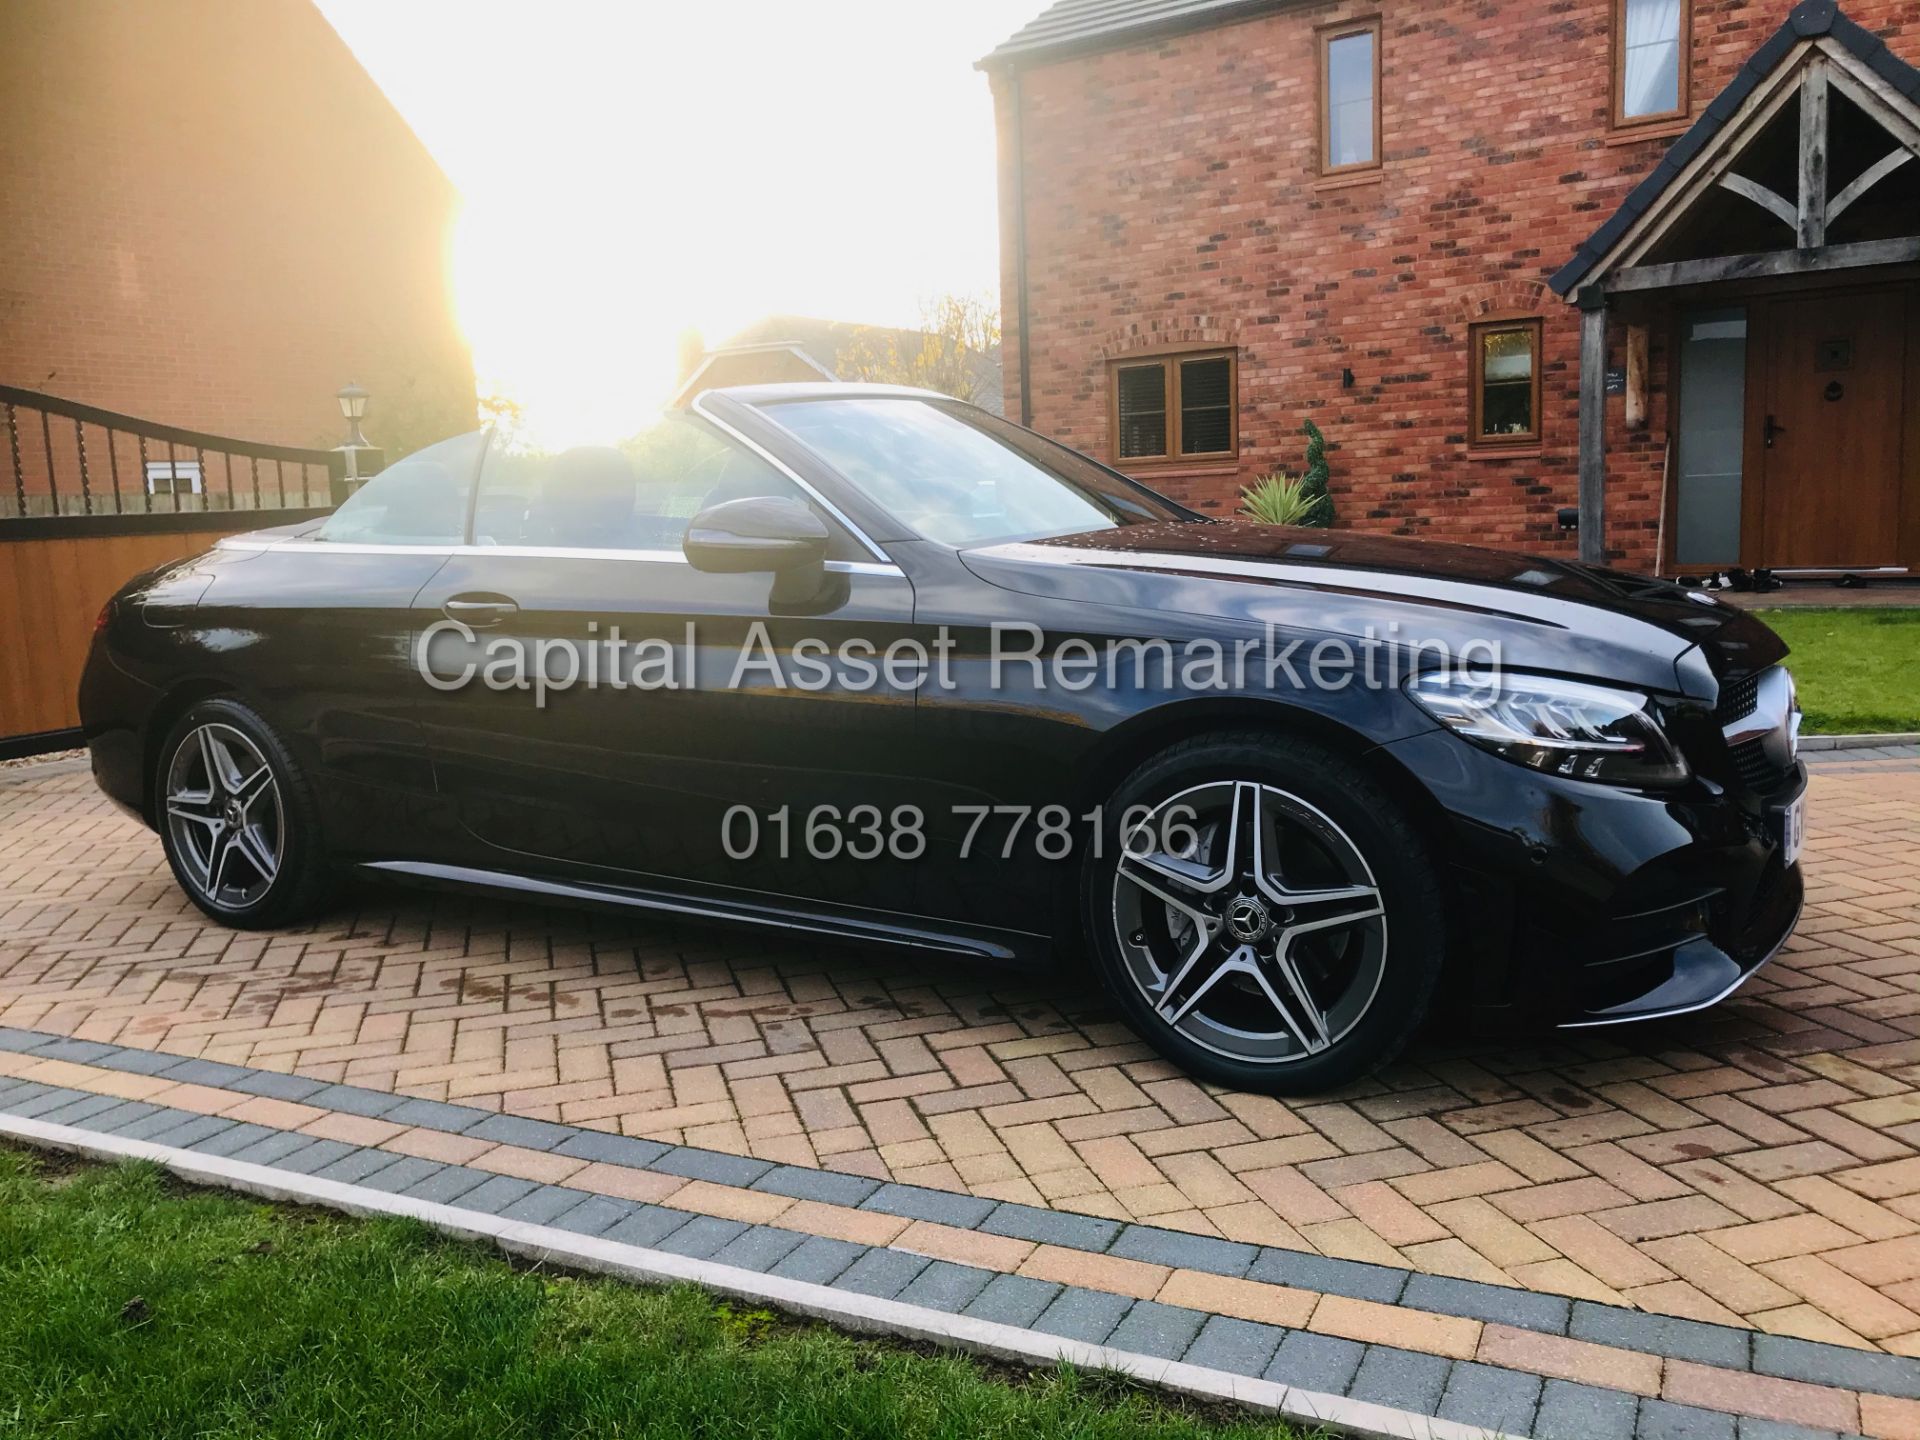 On Sale MERCEDES-BENZ C220d *AMG LINE -CABRIOLET* (2019) '9G TRONIC AUTO - LEATHER - SAT NAV' - Image 6 of 32